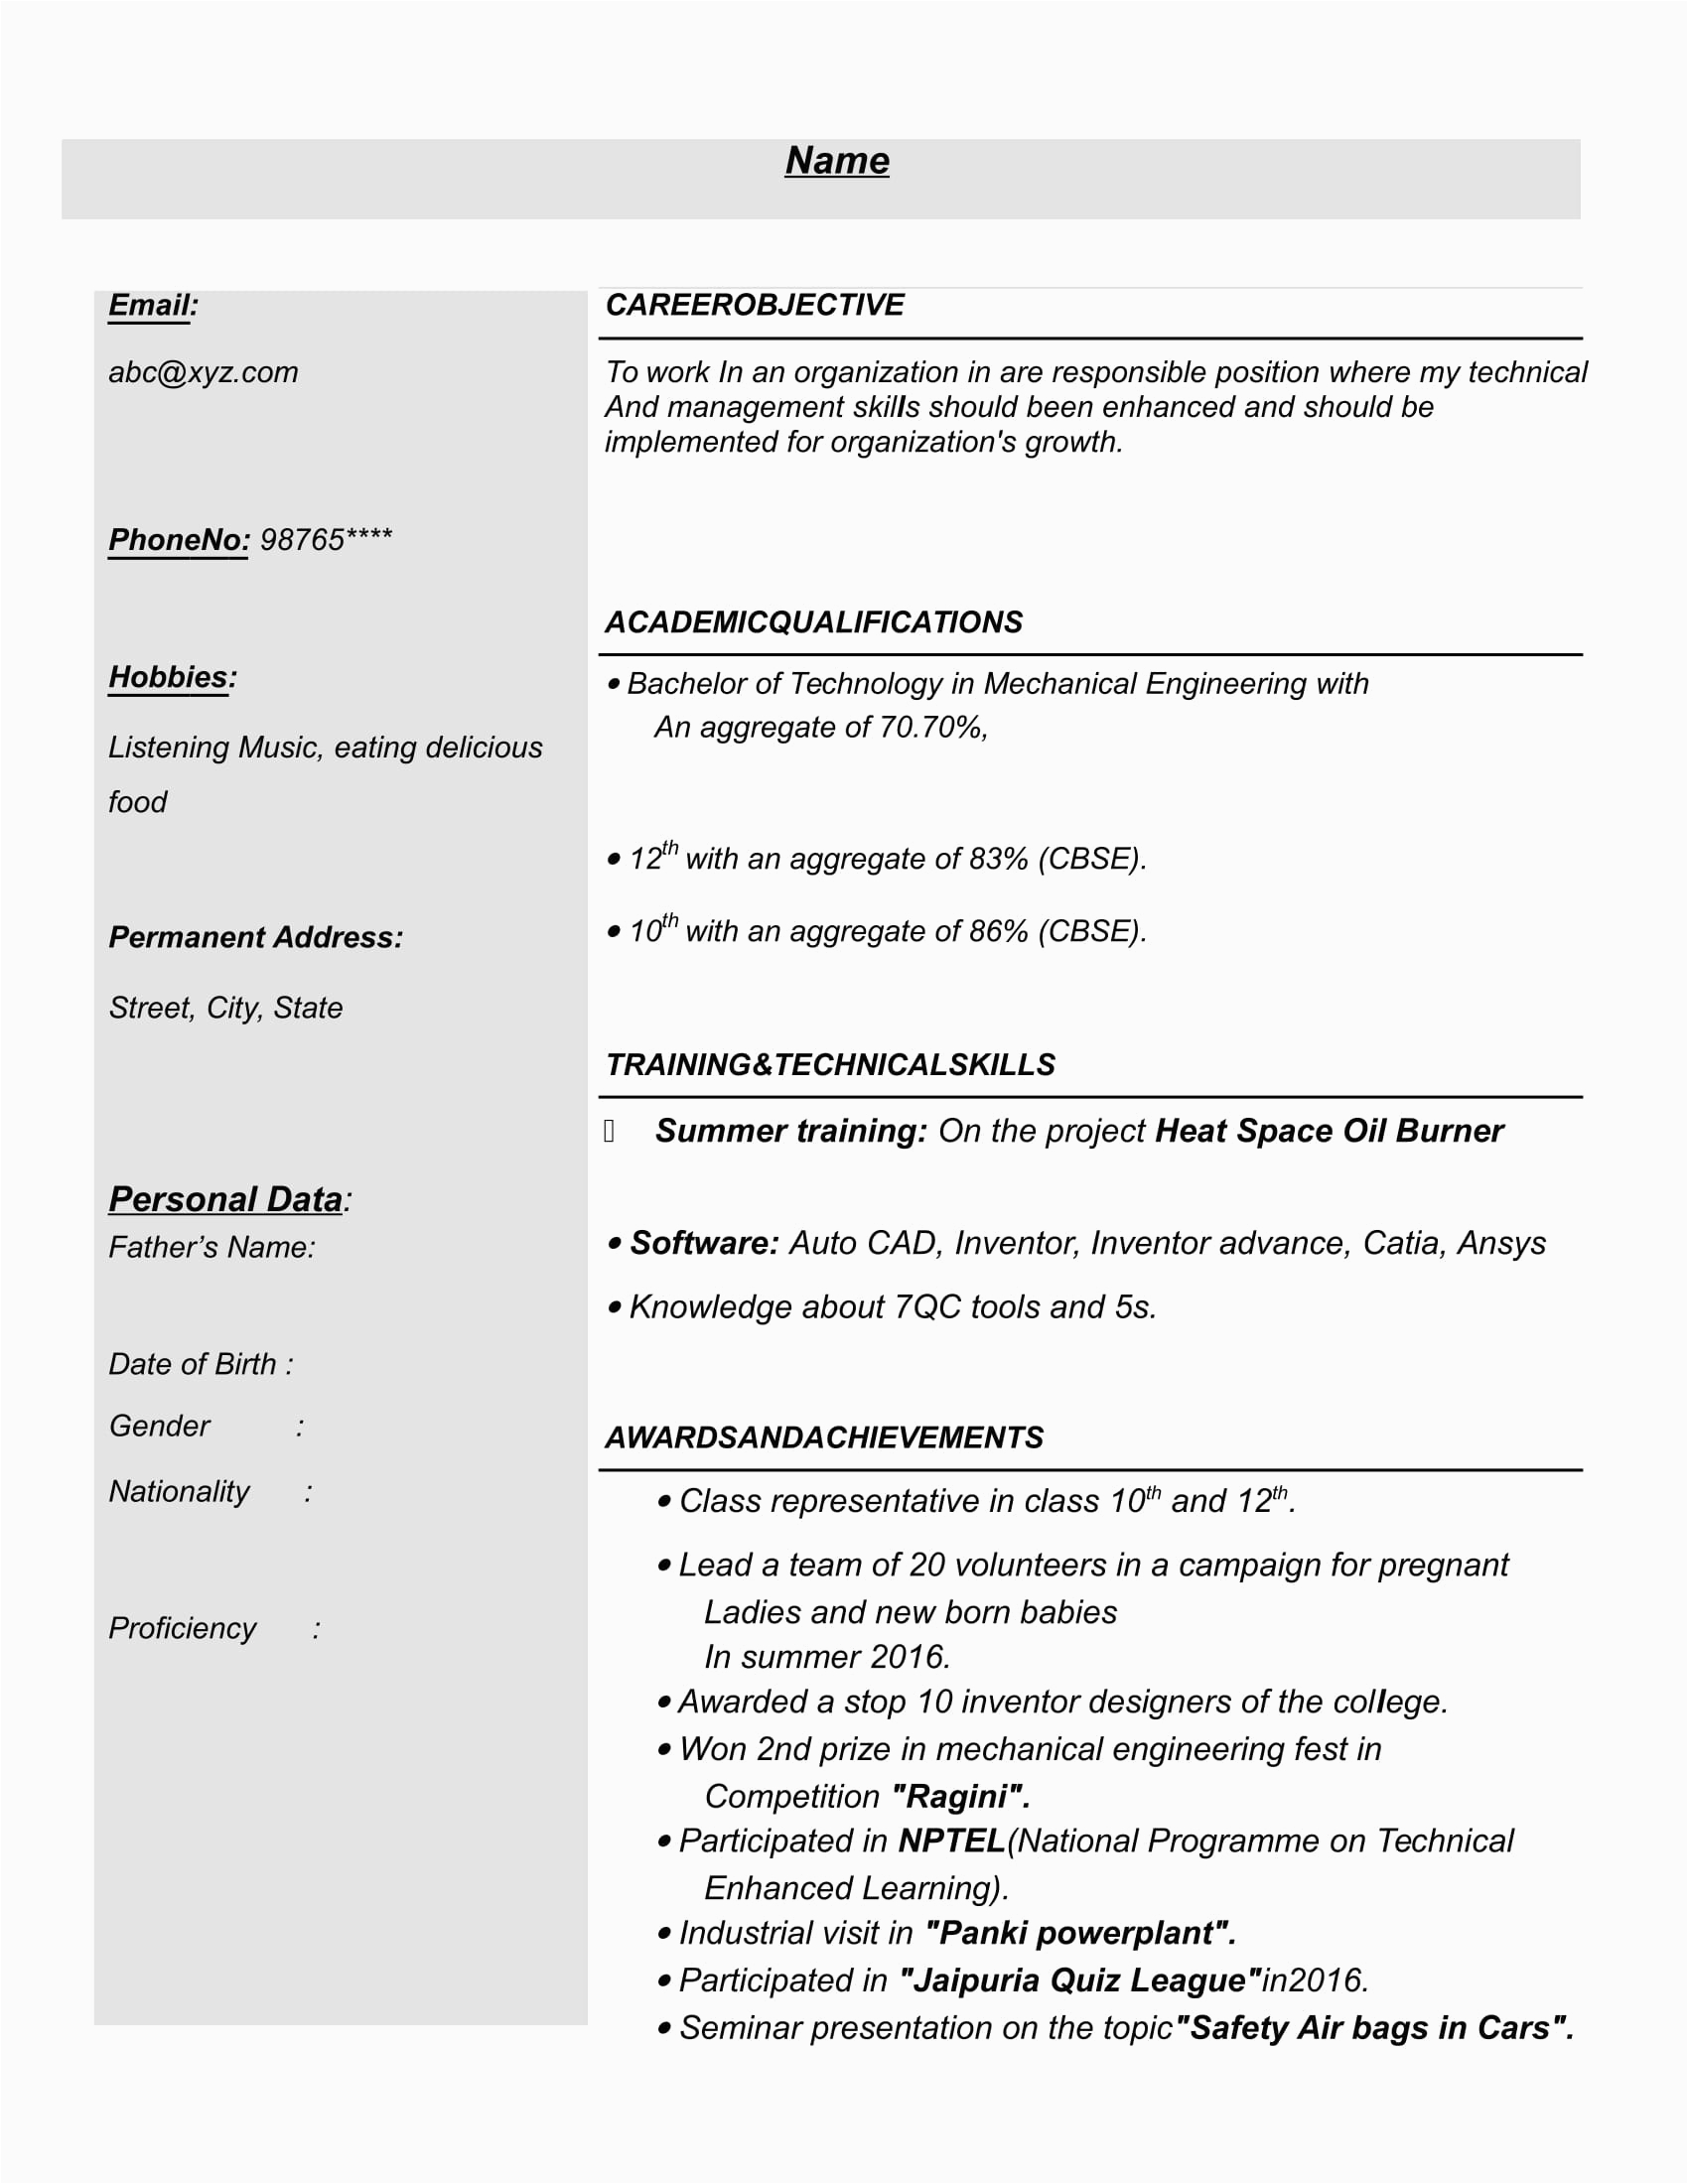 Mechanical Engineering Resume Sample for Freshers Resume Templates for Mechanical Engineer Freshers Download Free